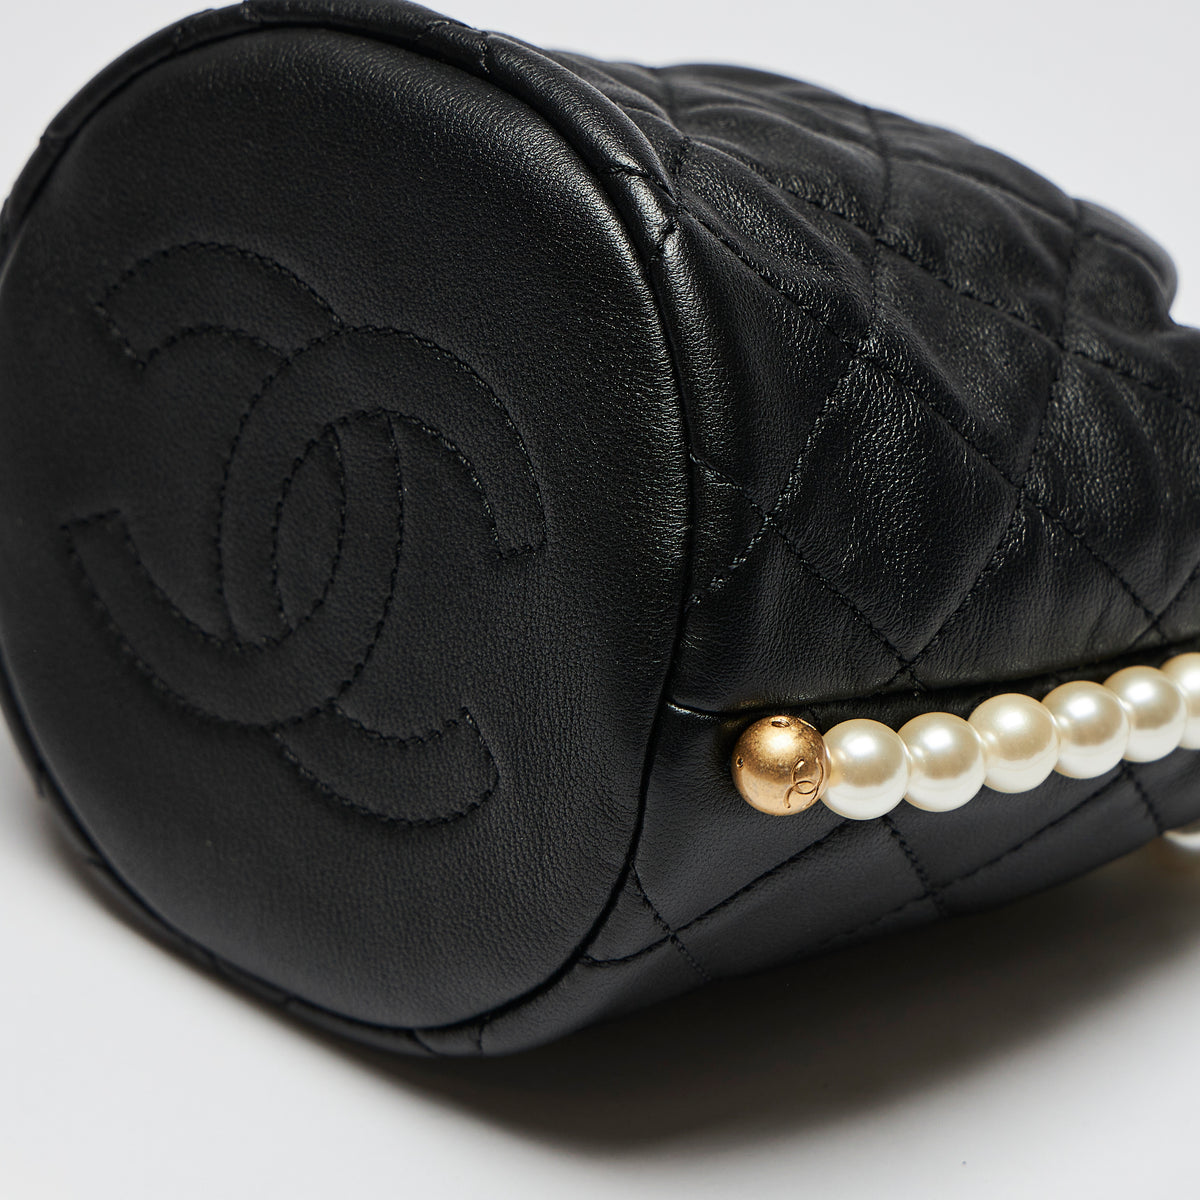 Excellent Pre-Loved Black Quilted Leather Mini Drawstring Bag with Pearl Shoulder Strap.(sides)